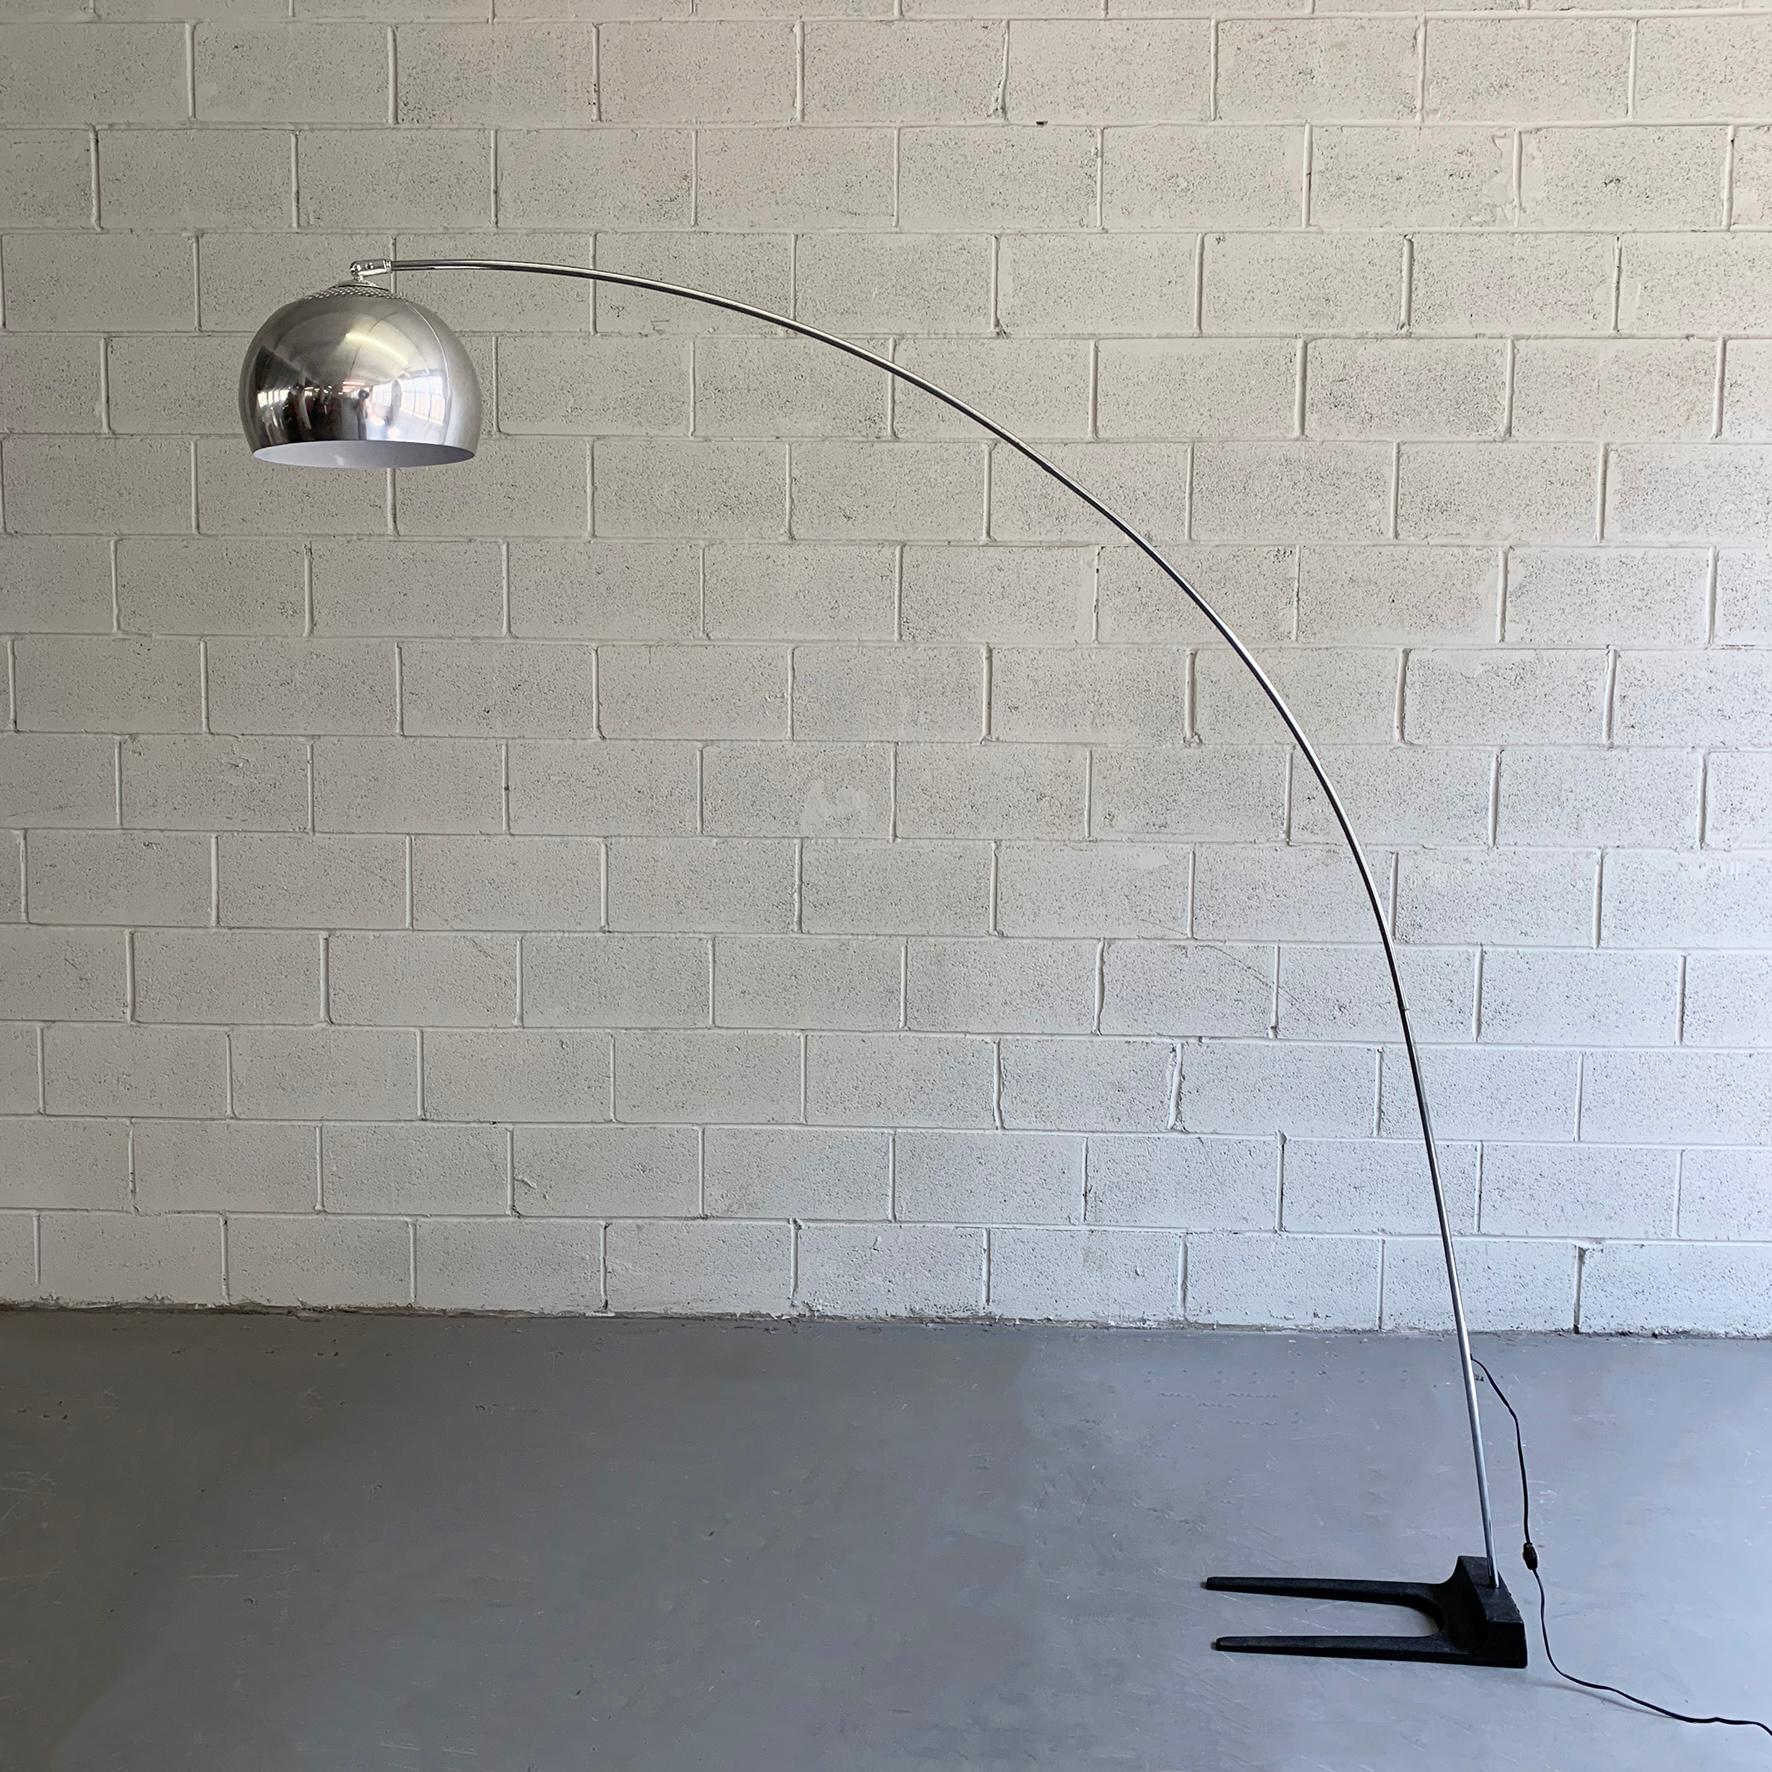 Mid-Century Modern, arc floor lamp features a 63 inch deep, chrome arc stem with dome shade and forked, cast iron, counter balance base. The lamp is wired to accept up to a 200 watt bulb.